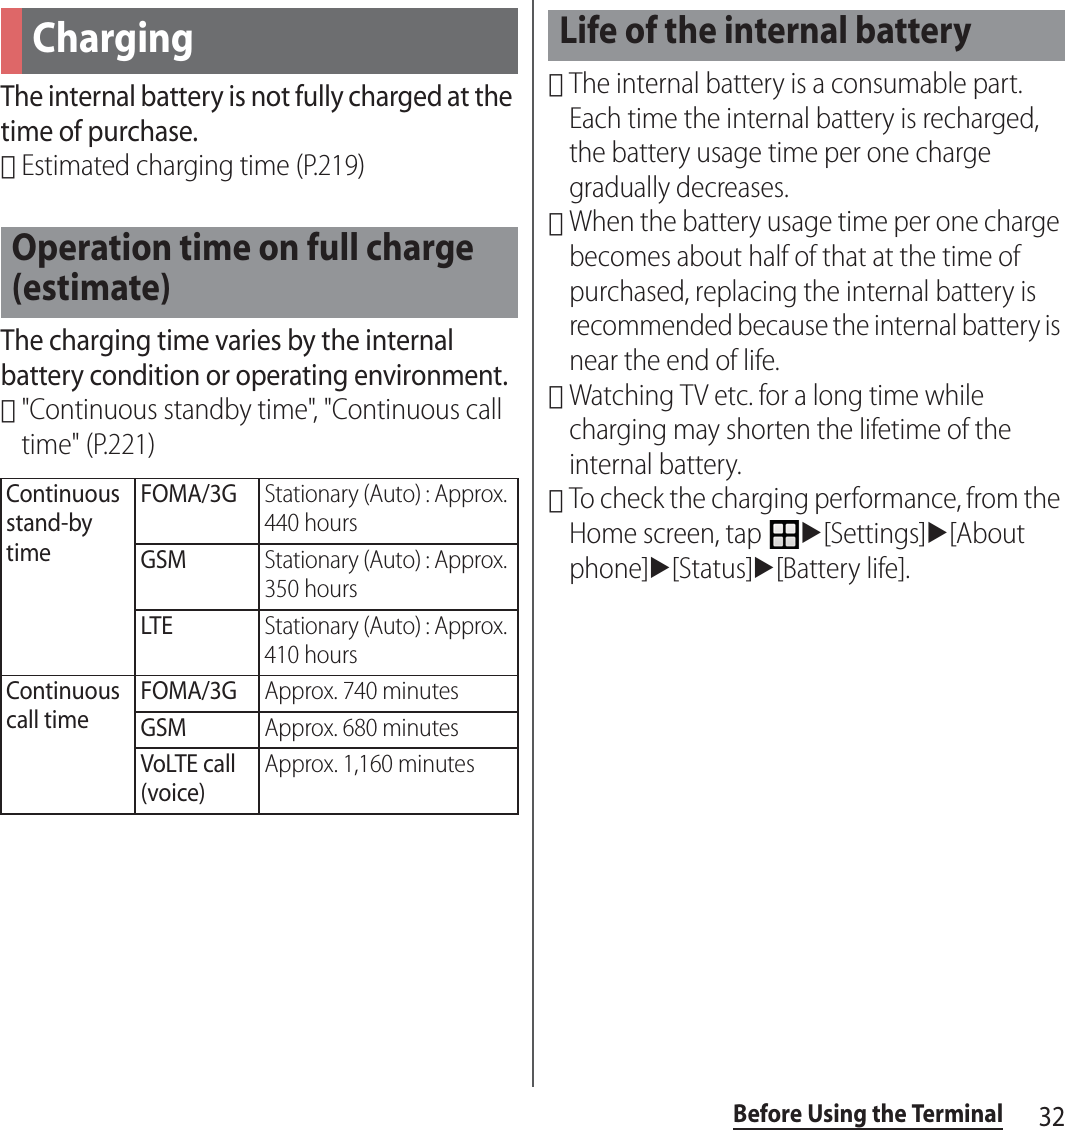 32Before Using the TerminalThe internal battery is not fully charged at the time of purchase.･Estimated charging time (P.219)The charging time varies by the internal battery condition or operating environment.･&quot;Continuous standby time&quot;, &quot;Continuous call time&quot; (P.221)･The internal battery is a consumable part. Each time the internal battery is recharged, the battery usage time per one charge gradually decreases.･When the battery usage time per one charge becomes about half of that at the time of purchased, replacing the internal battery is recommended because the internal battery is near the end of life.･Watching TV etc. for a long time while charging may shorten the lifetime of the internal battery.･To check the charging performance, from the Home screen, tap u[Settings]u[About phone]u[Status]u[Battery life].ChargingOperation time on full charge (estimate)Continuous stand-by timeFOMA/3GStationary (Auto) : Approx. 440 hoursGSMStationary (Auto) : Approx. 350 hoursLTEStationary (Auto) : Approx. 410 hoursContinuous call timeFOMA/3GApprox. 740 minutesGSMApprox. 680 minutesVoLTE call (voice)Approx. 1,160 minutesLife of the internal battery